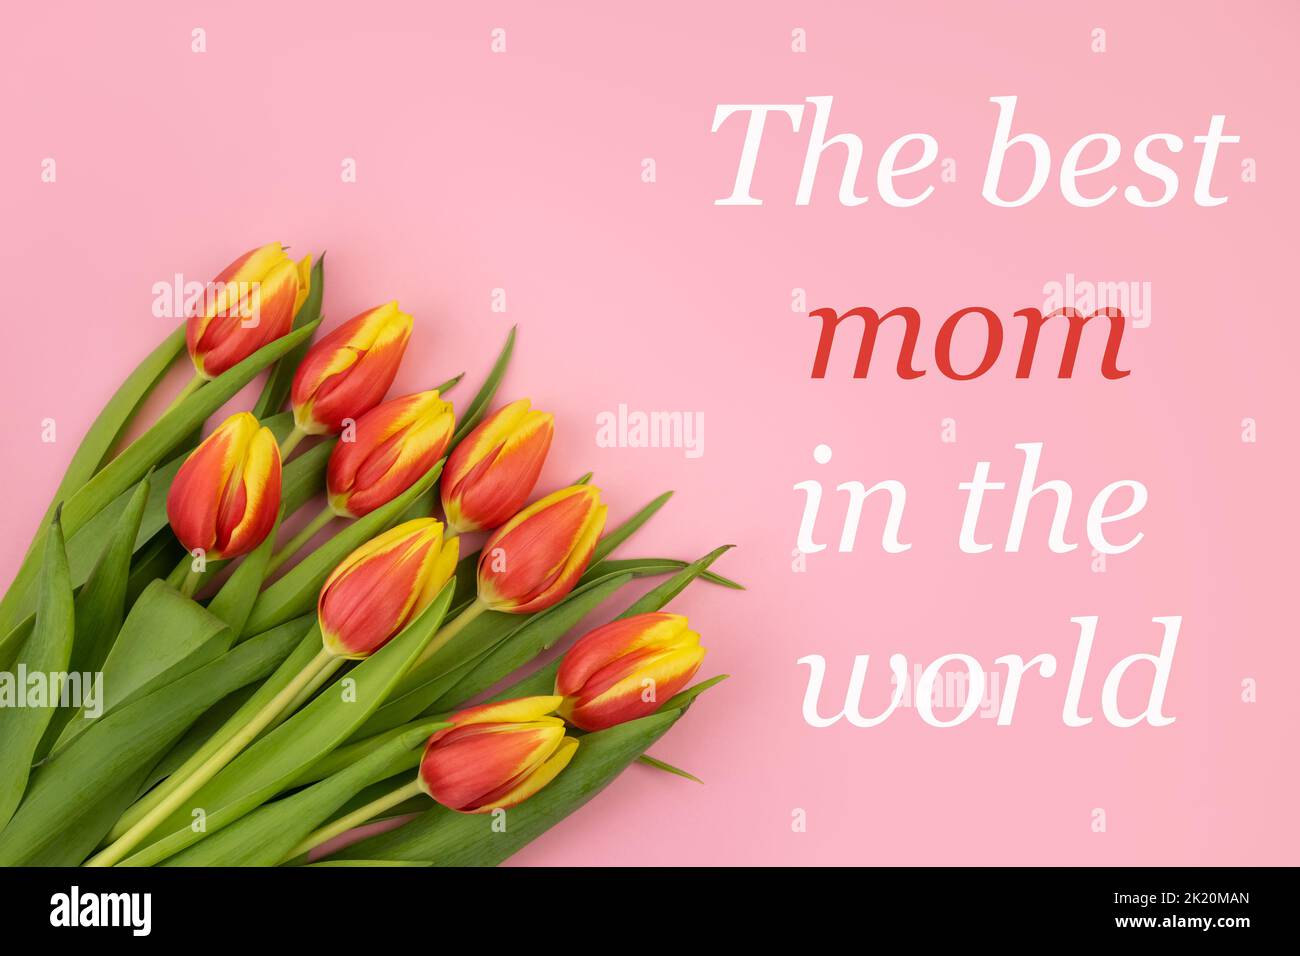 https://c8.alamy.com/comp/2K20MAN/tulips-are-on-a-pink-background-and-the-text-the-best-mom-in-the-world-2K20MAN.jpg